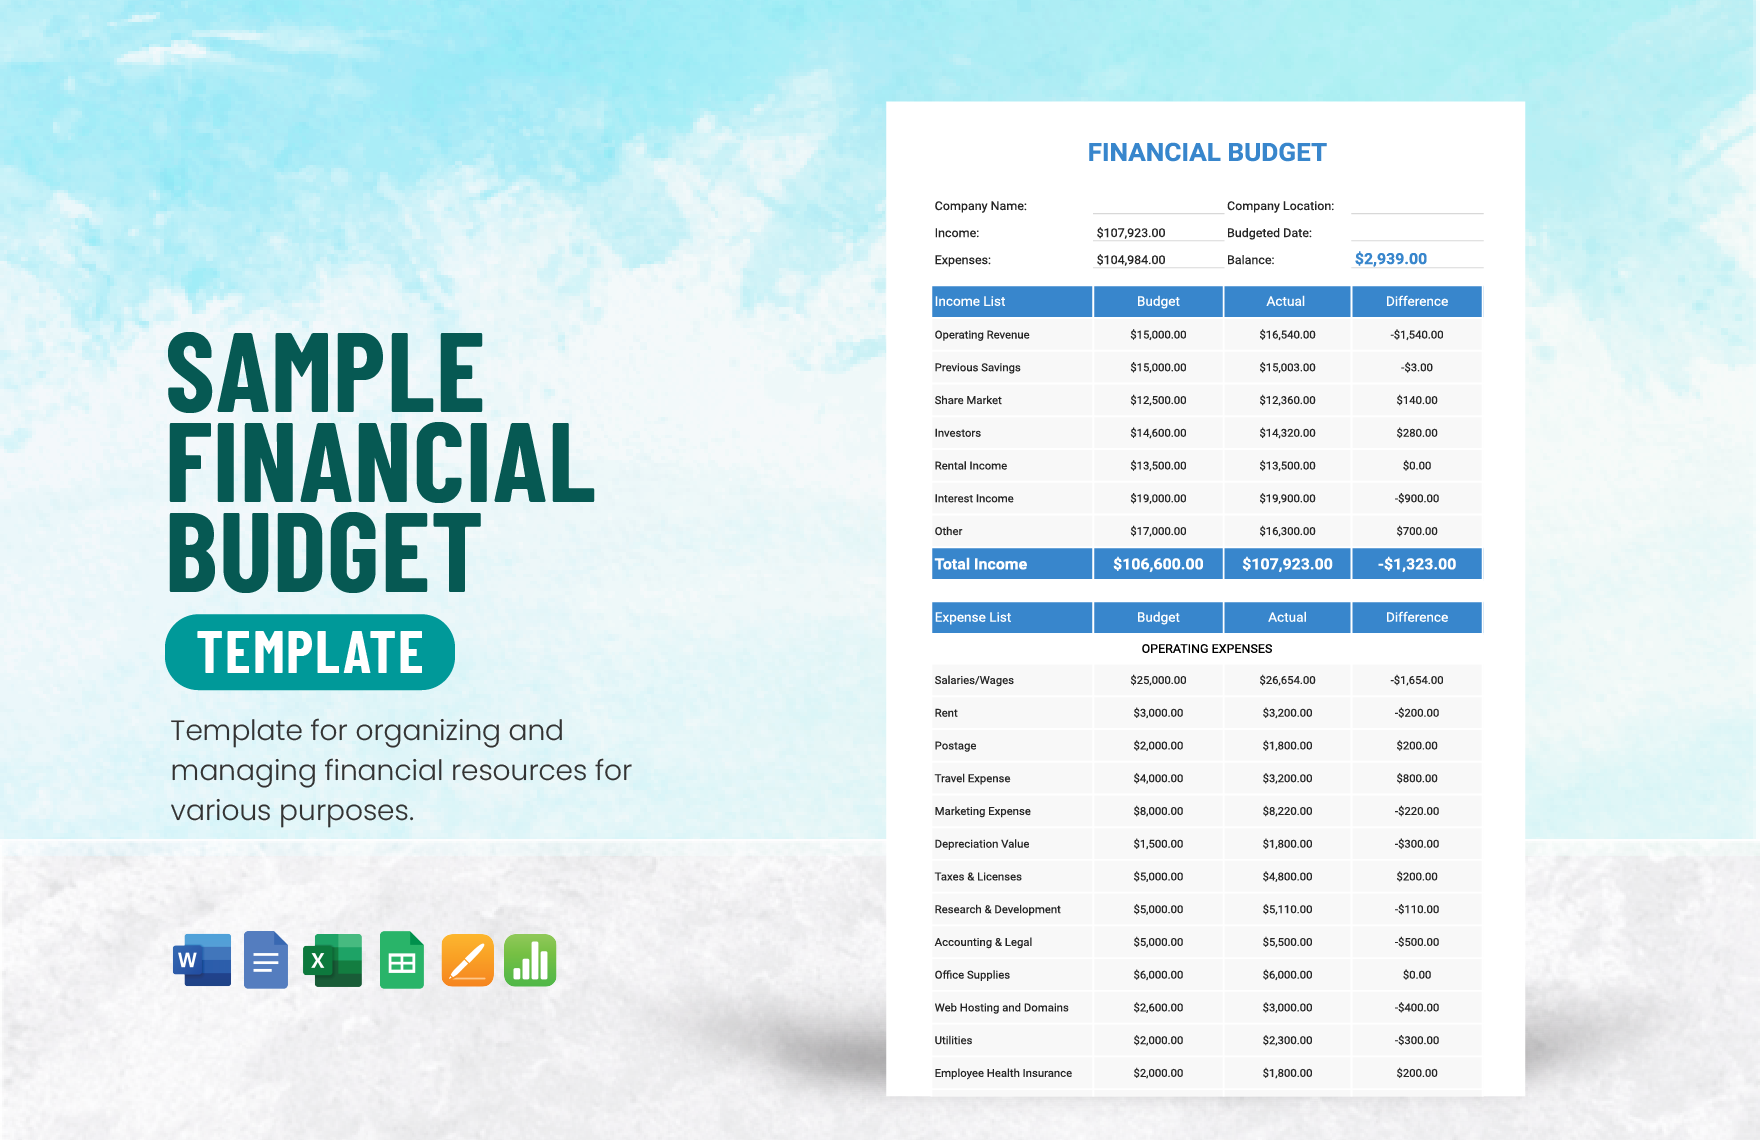 Sample Financial Budget Template in Word, Google Docs, Excel, Google Sheets, Apple Pages, Apple Numbers